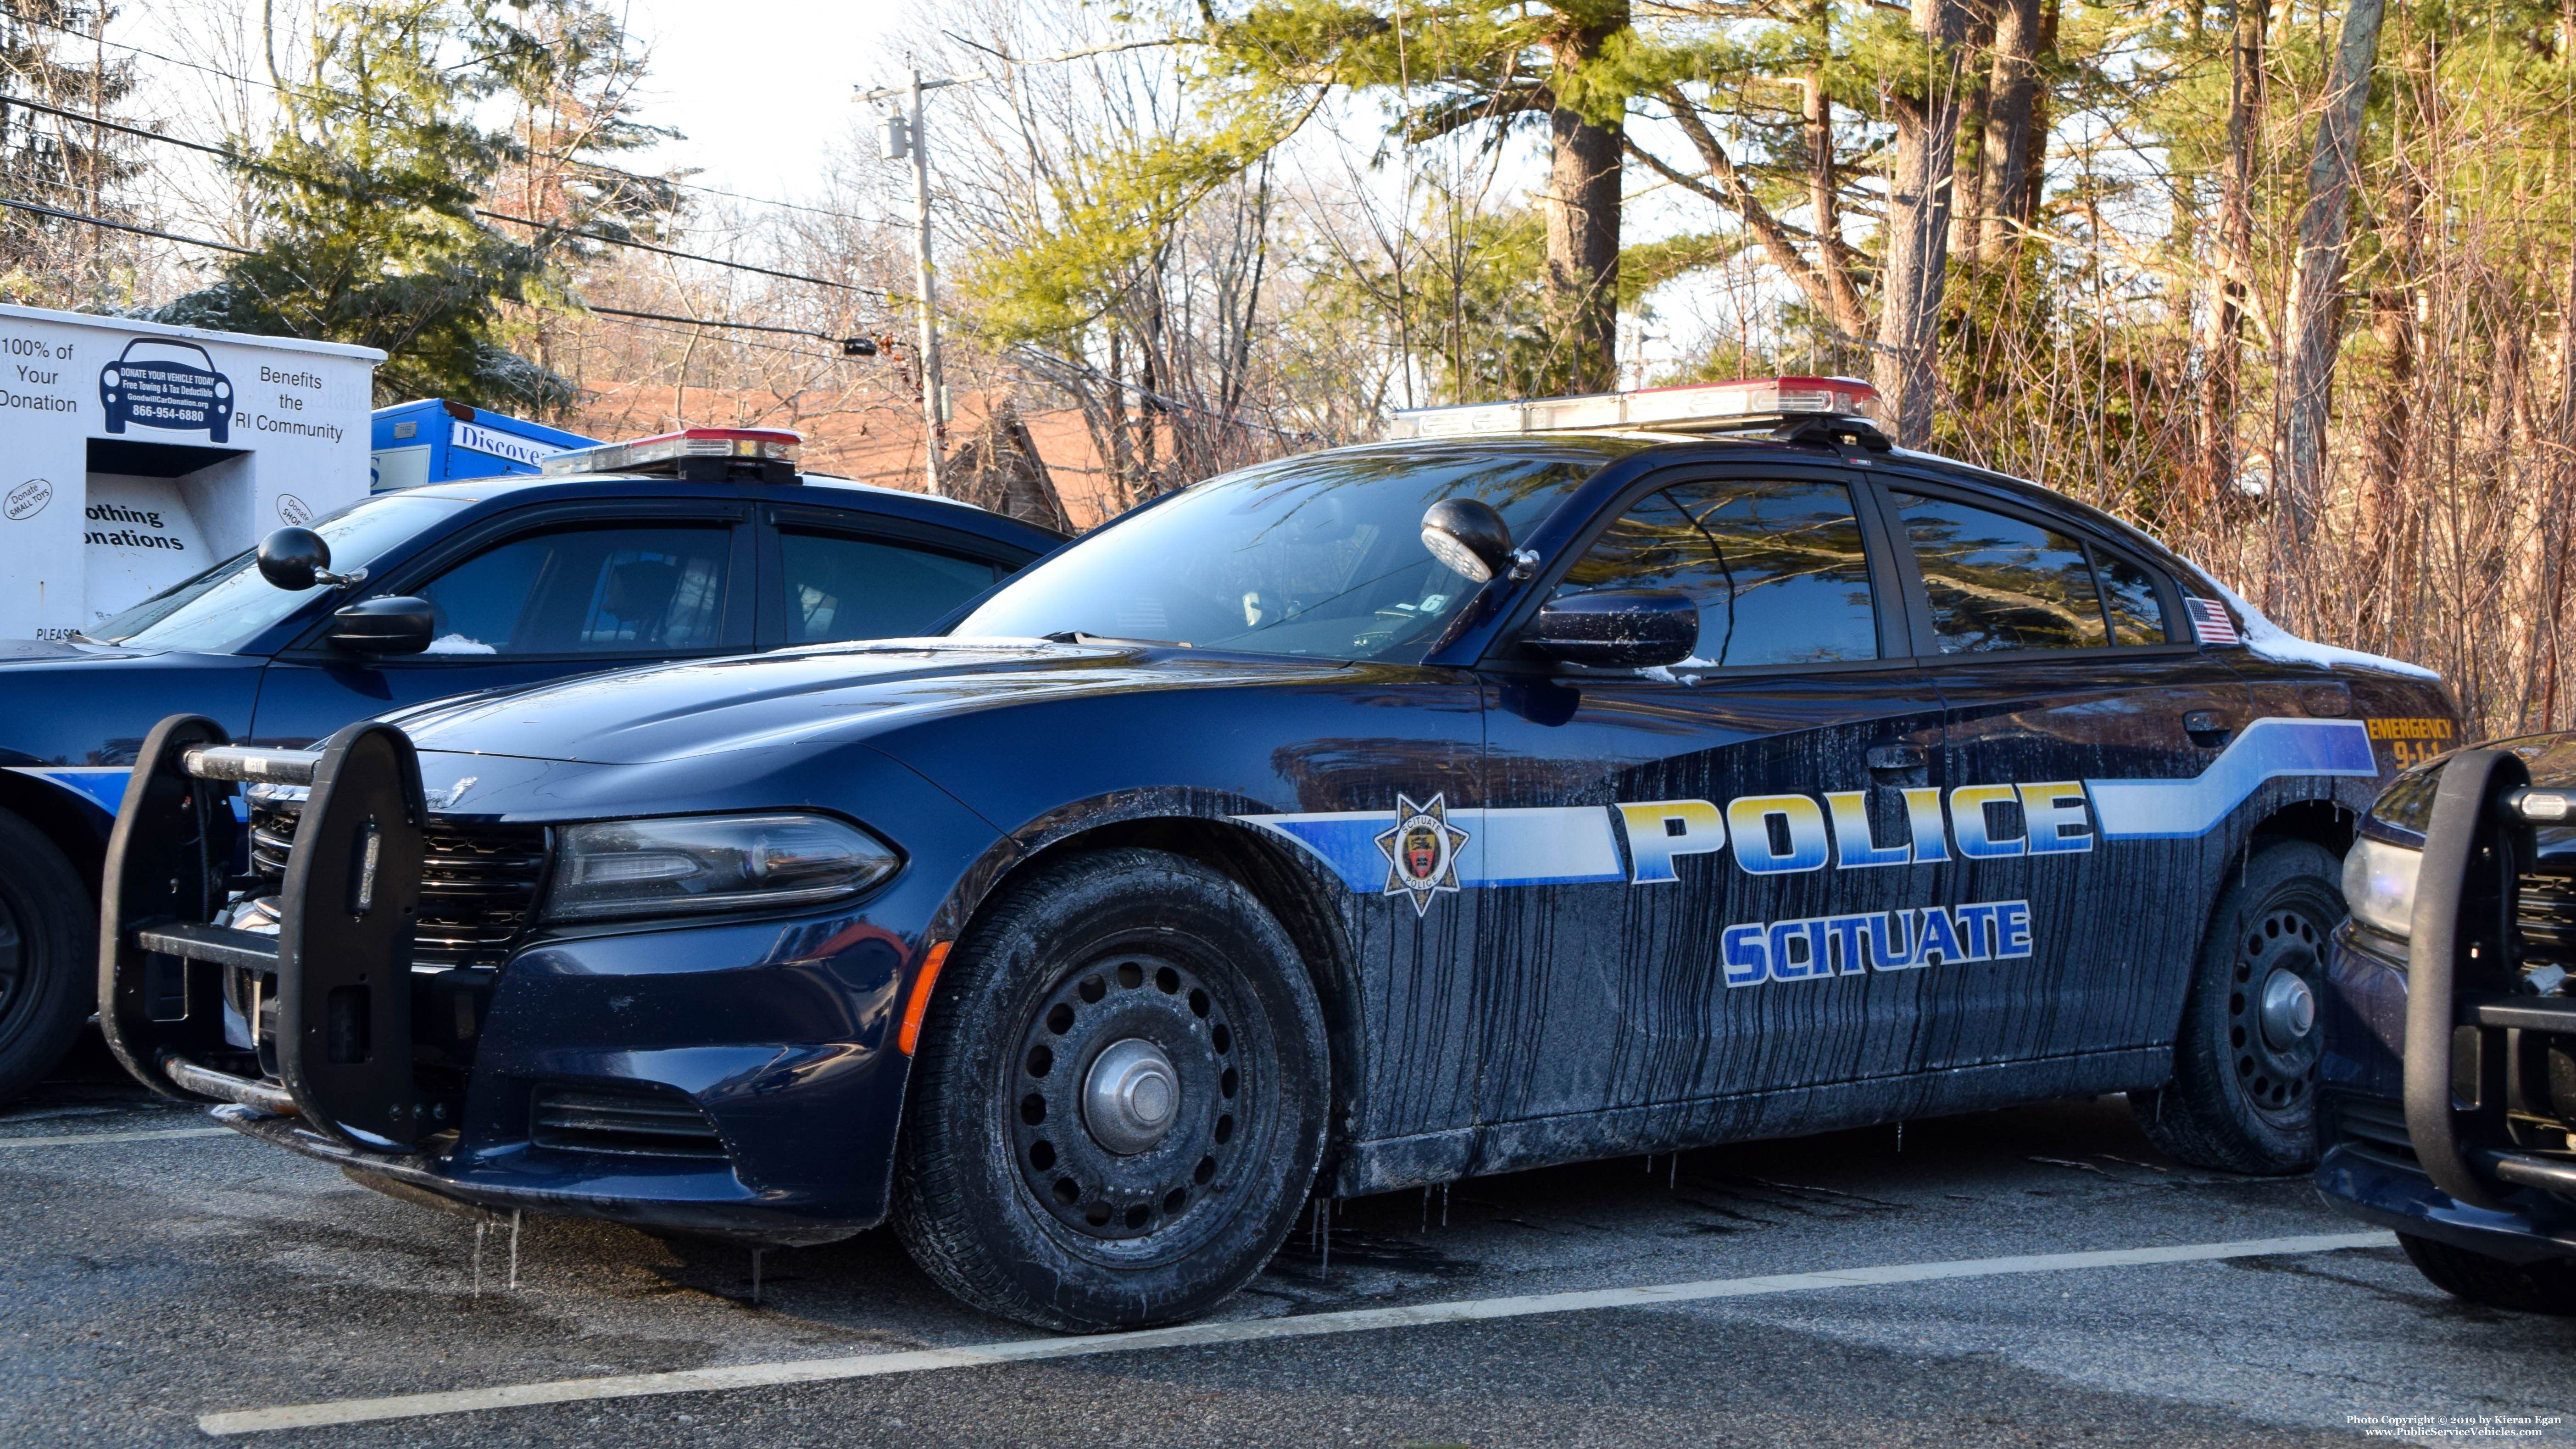 A photo  of Scituate Police
            Cruiser 756, a 2017 Dodge Charger             taken by Kieran Egan